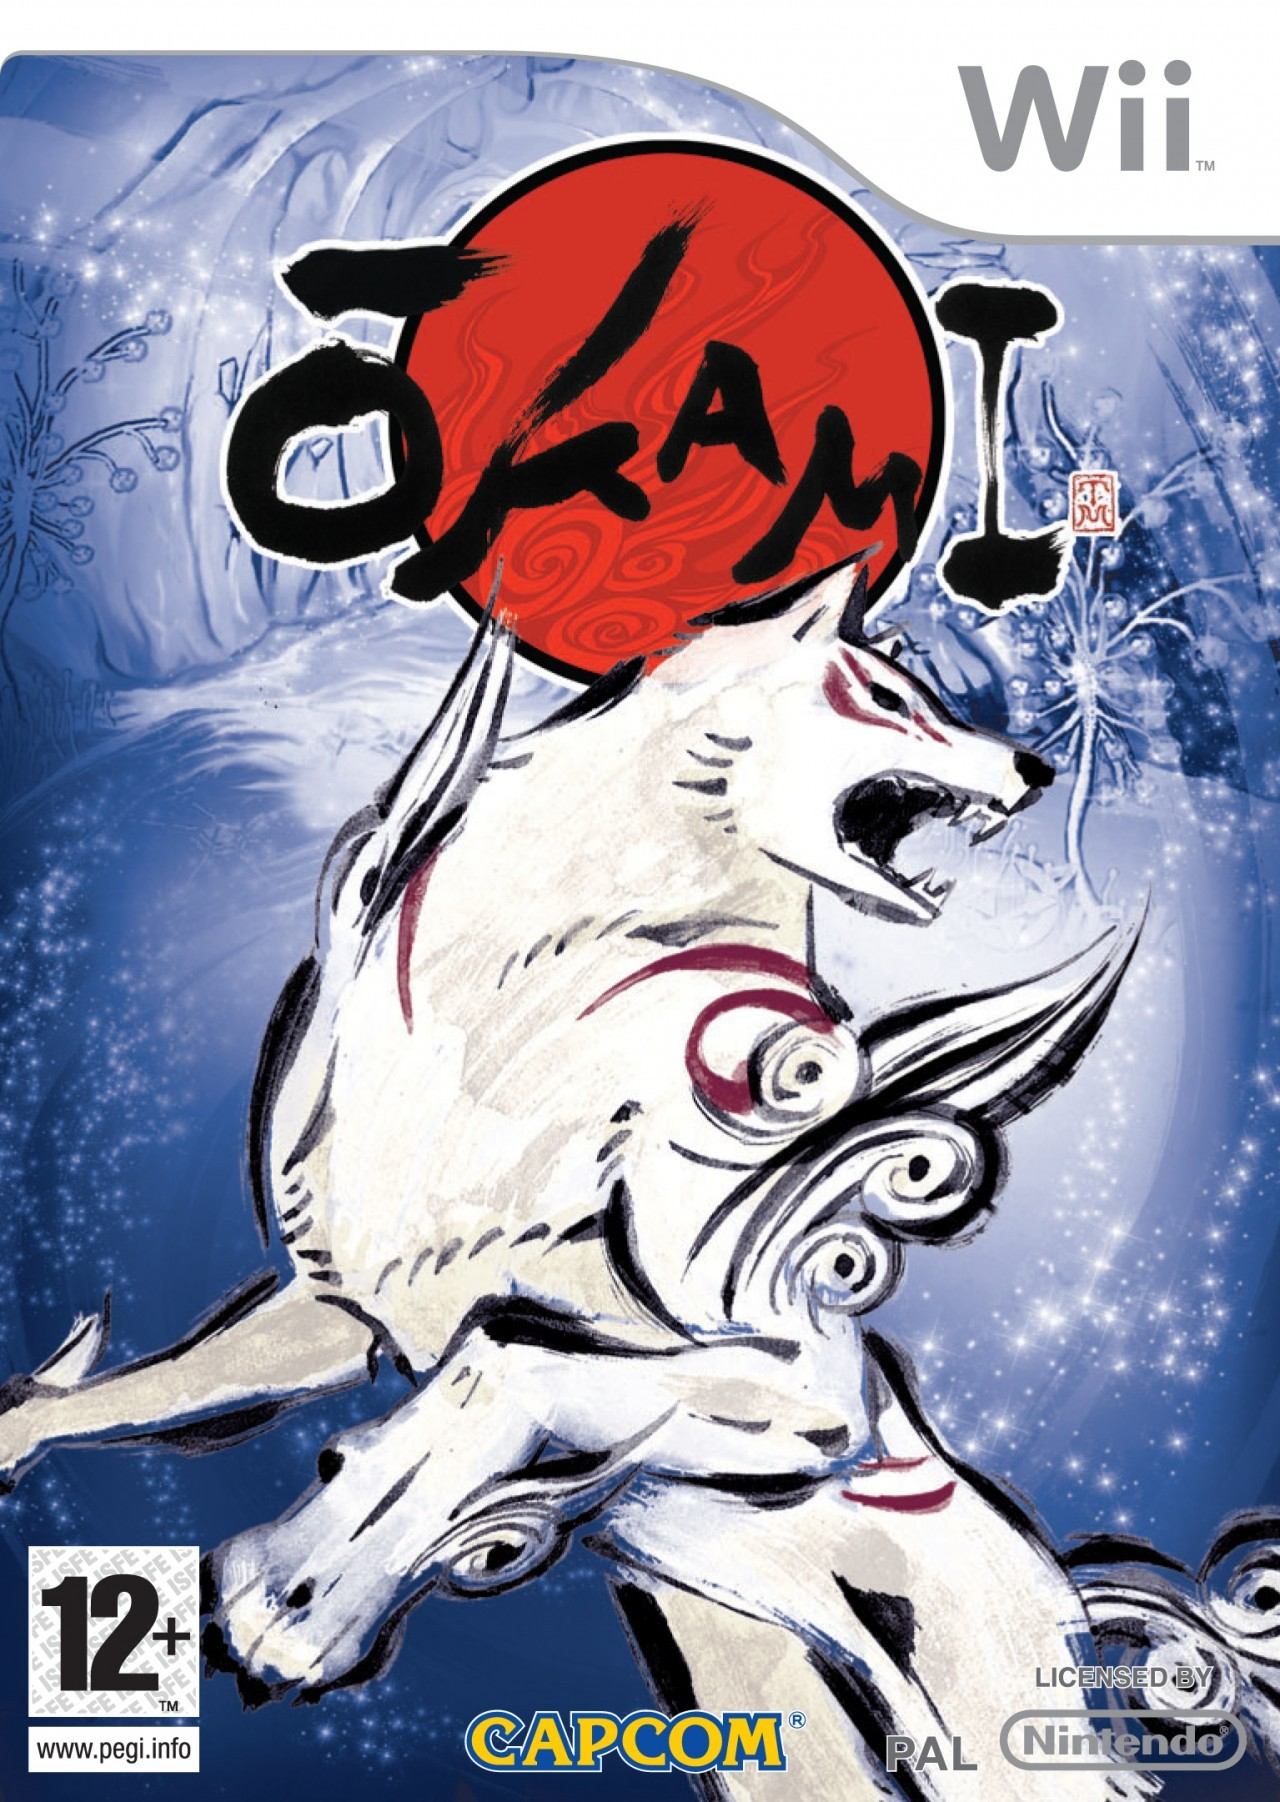 Okami Playstation 2 PS2 Japan New Swordsman and Wolf Will Fight 8